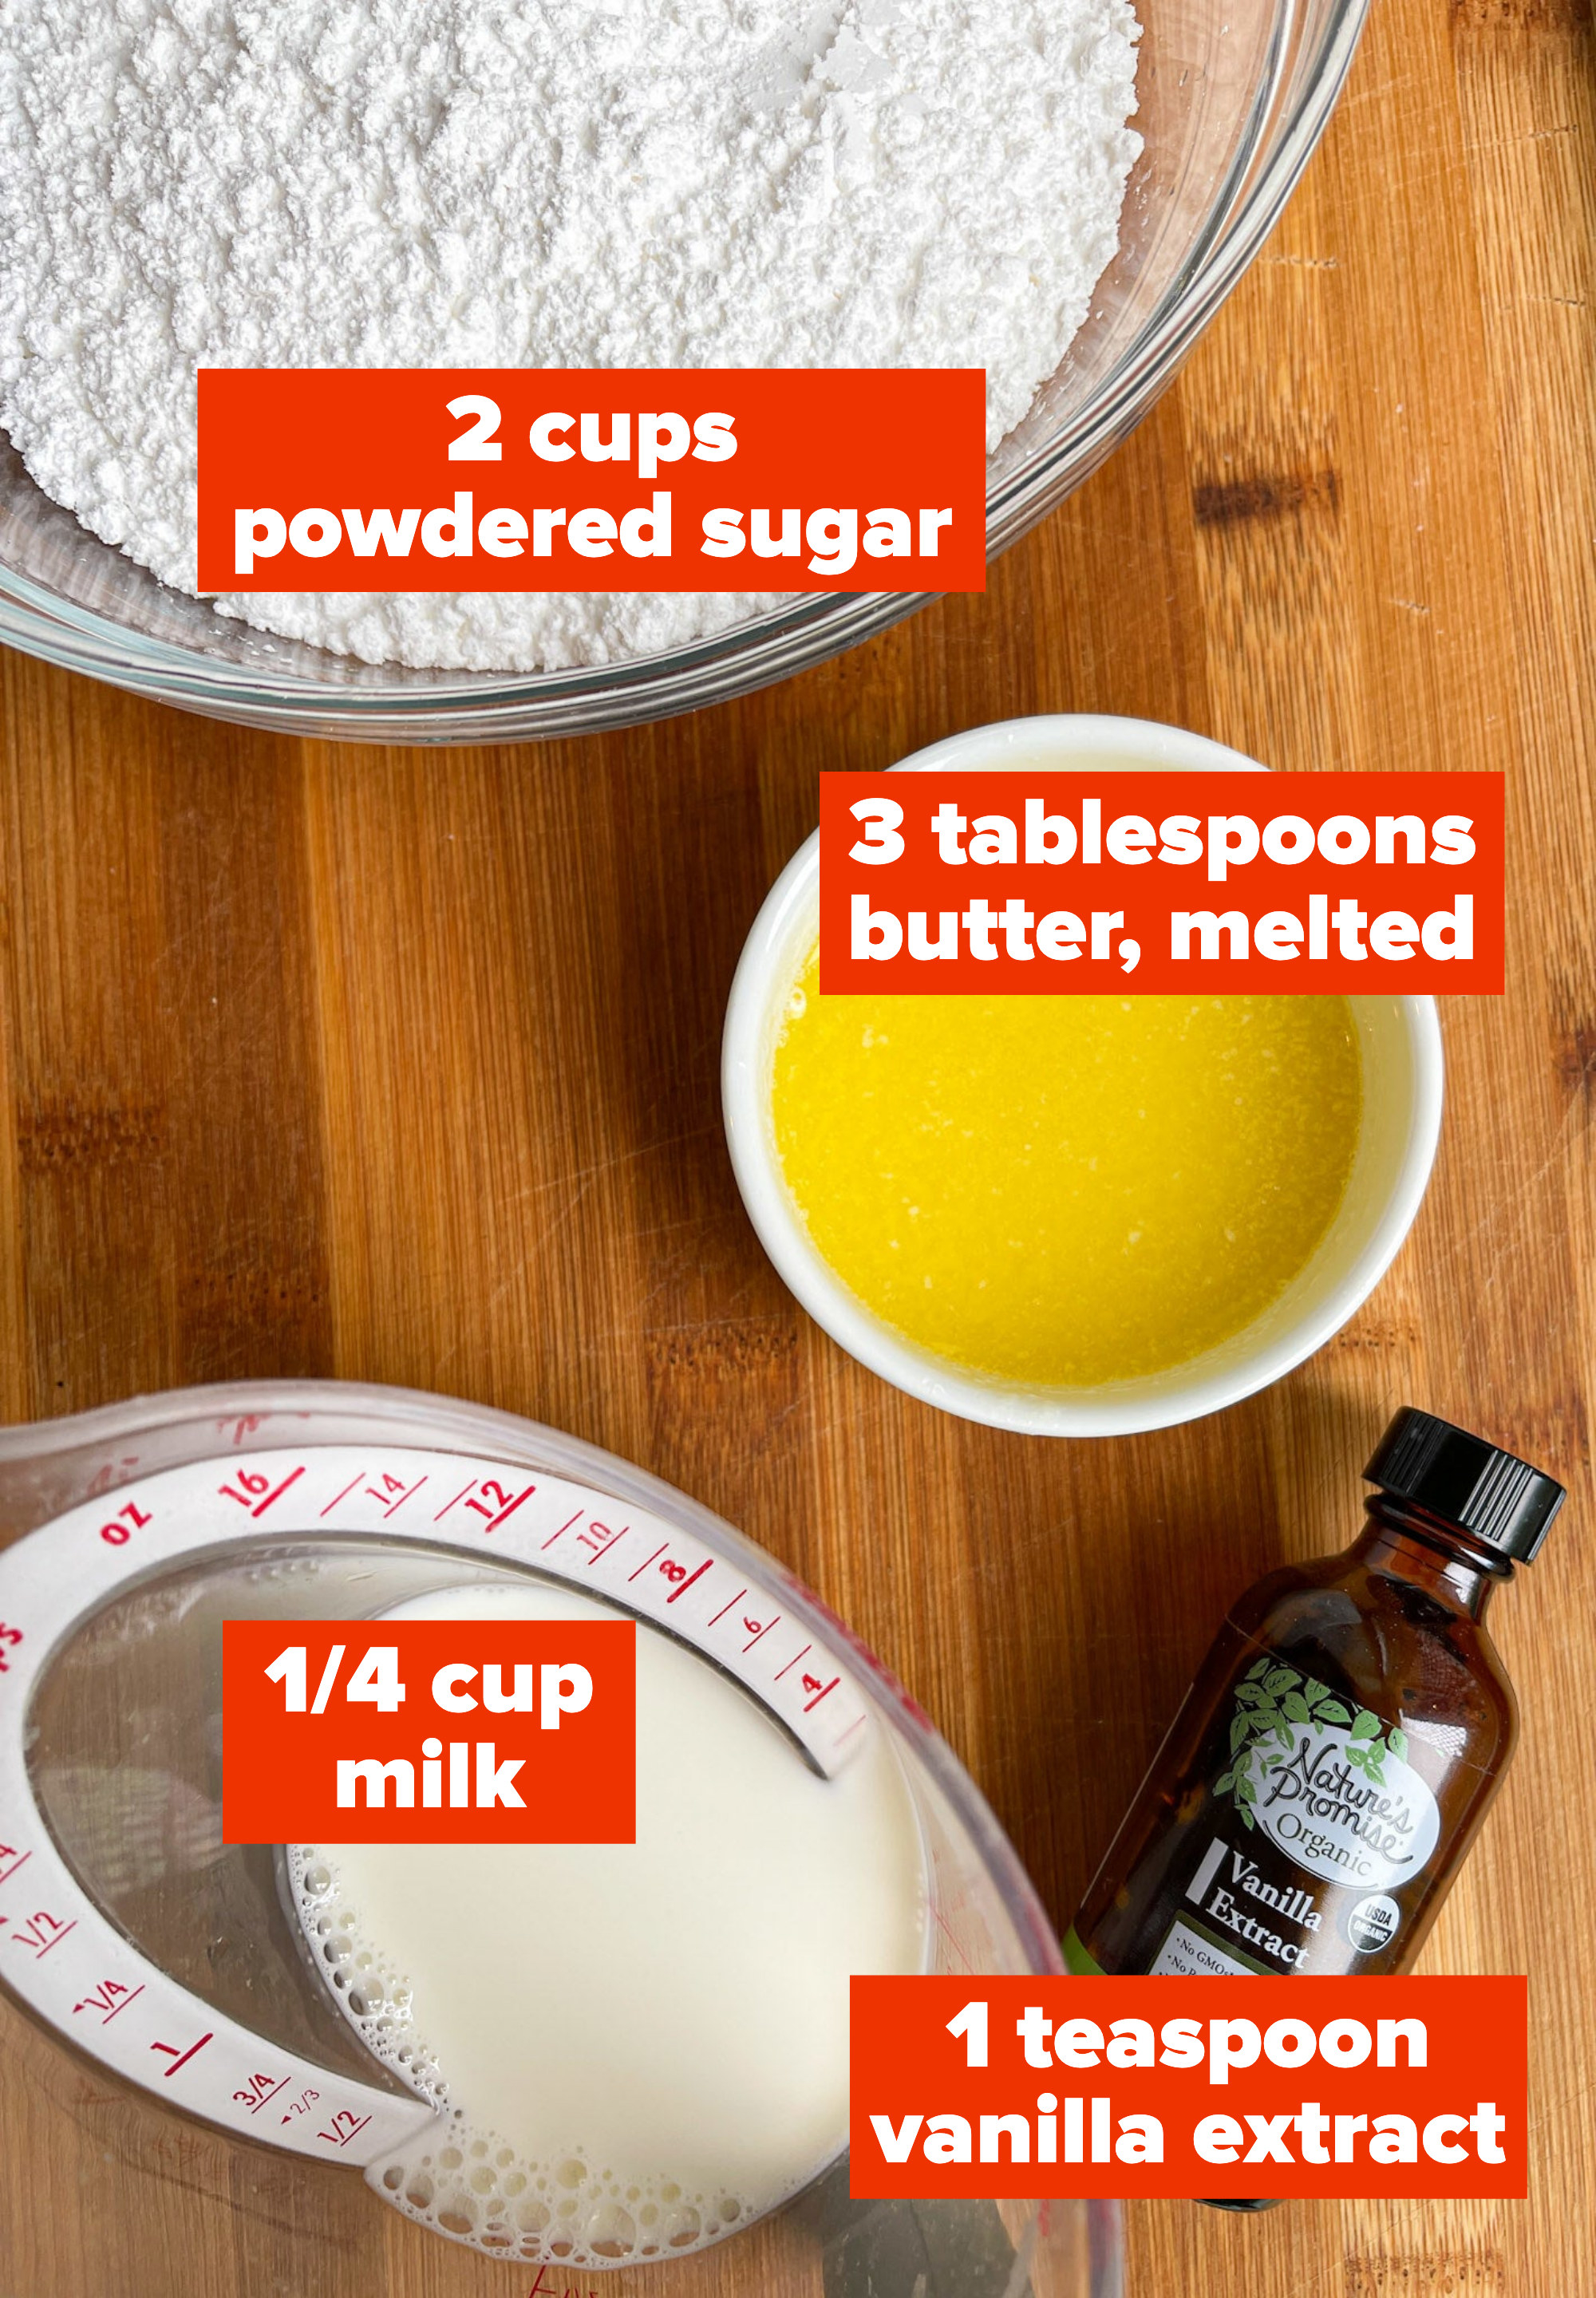 2 cups powdered sugar, 3 tablespoons butter, melted, 1/4 cup milk, 1 teaspoon vanilla extract